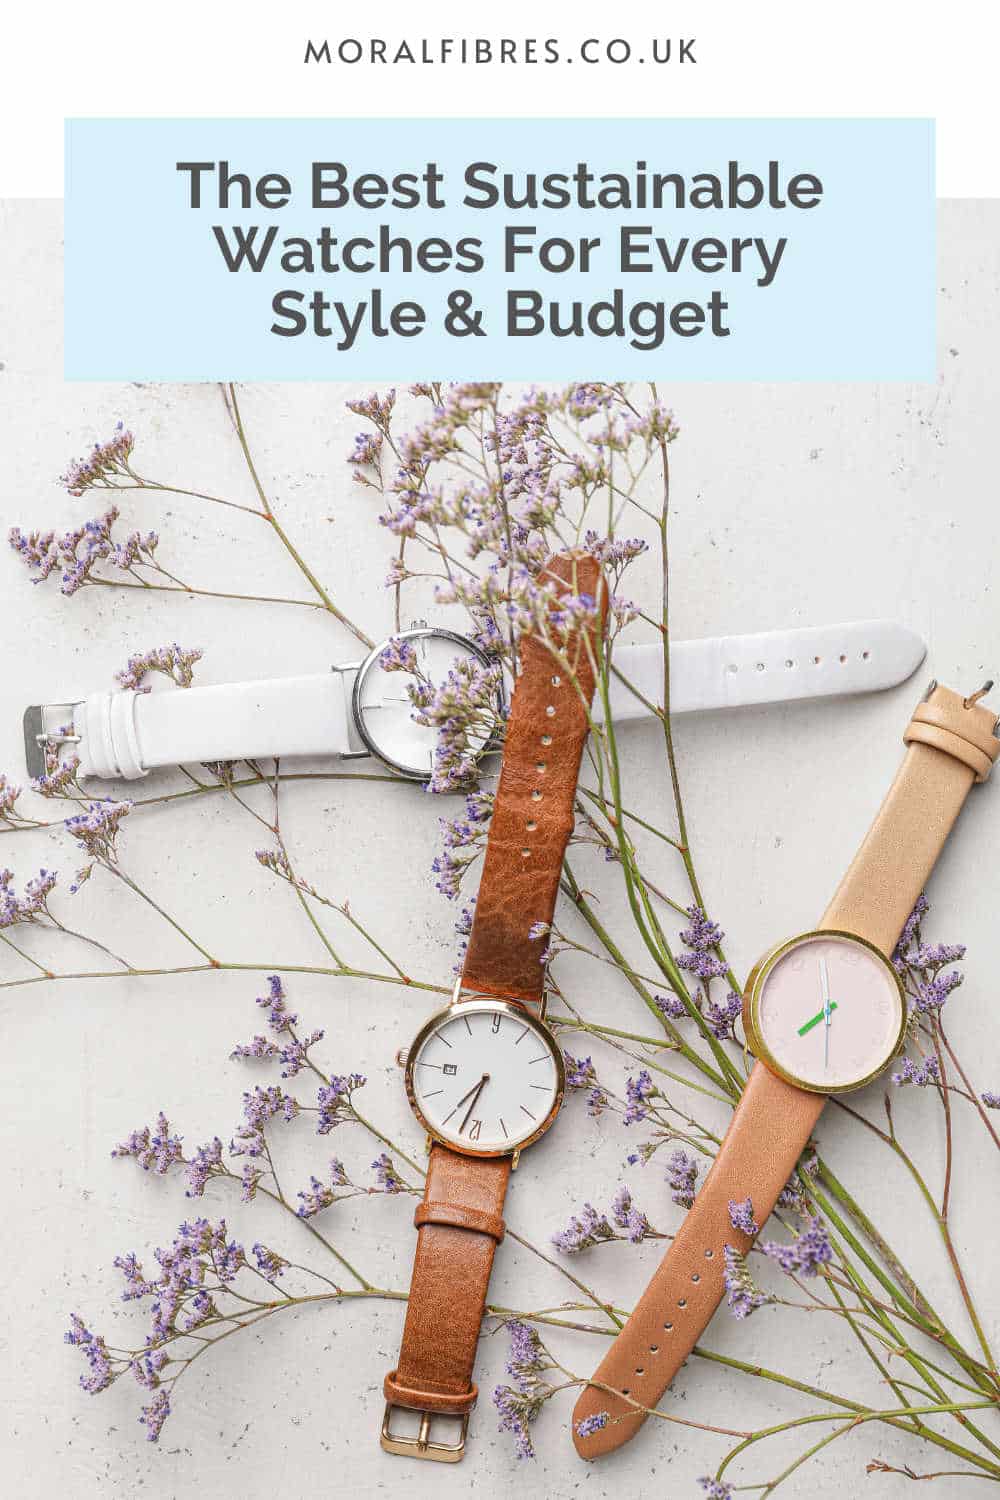 The Best Sustainable Watches For Every Style & Budget